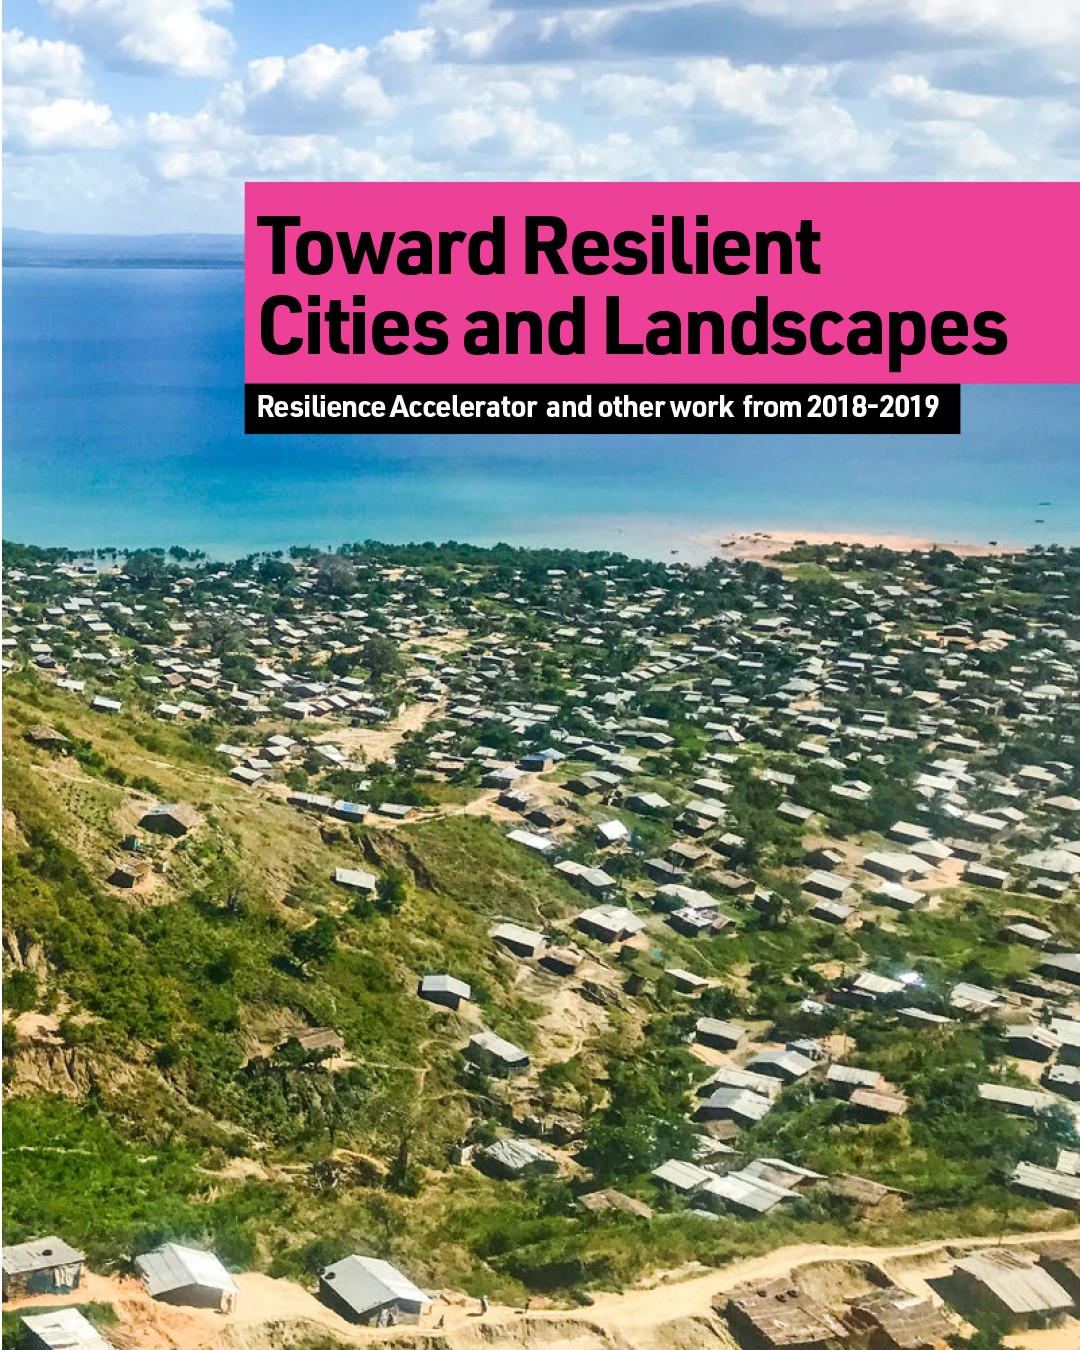 Towards Resilient Cities and Landscapes